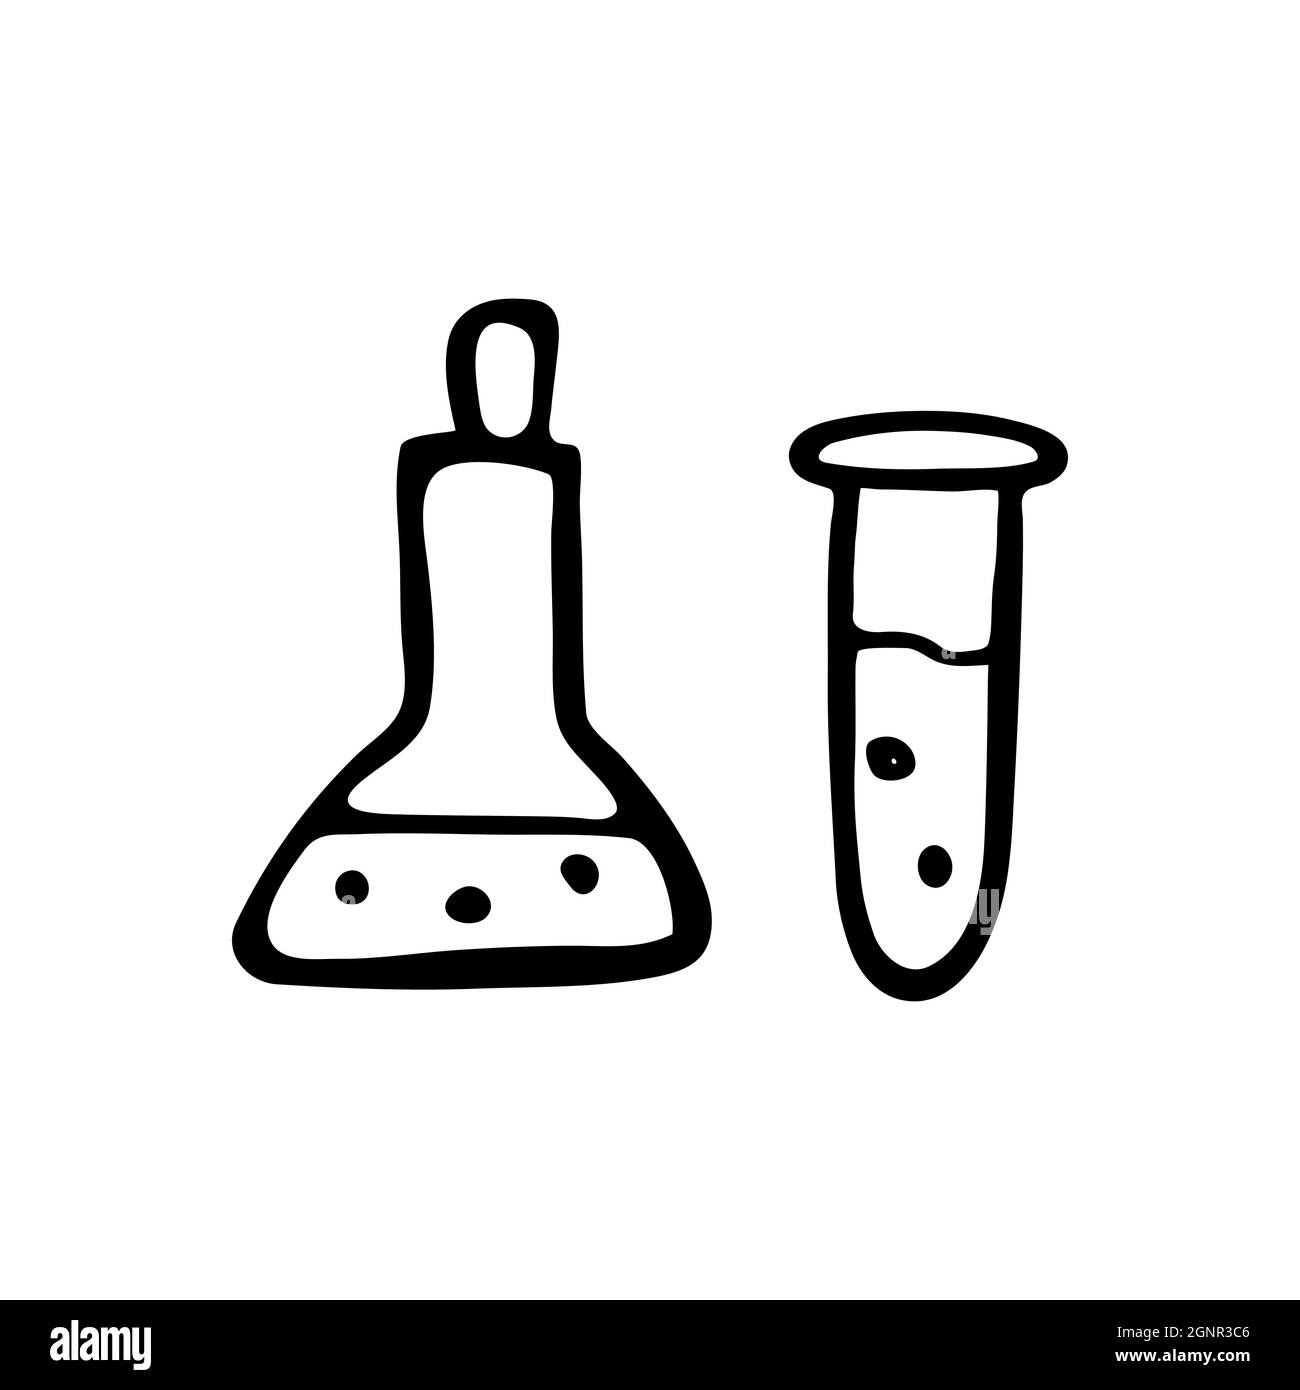 Hand drawn doodle style test tube in vector. Isolated illustration on white background. For interior design, wallpaper, packaging, poster Stock Vector